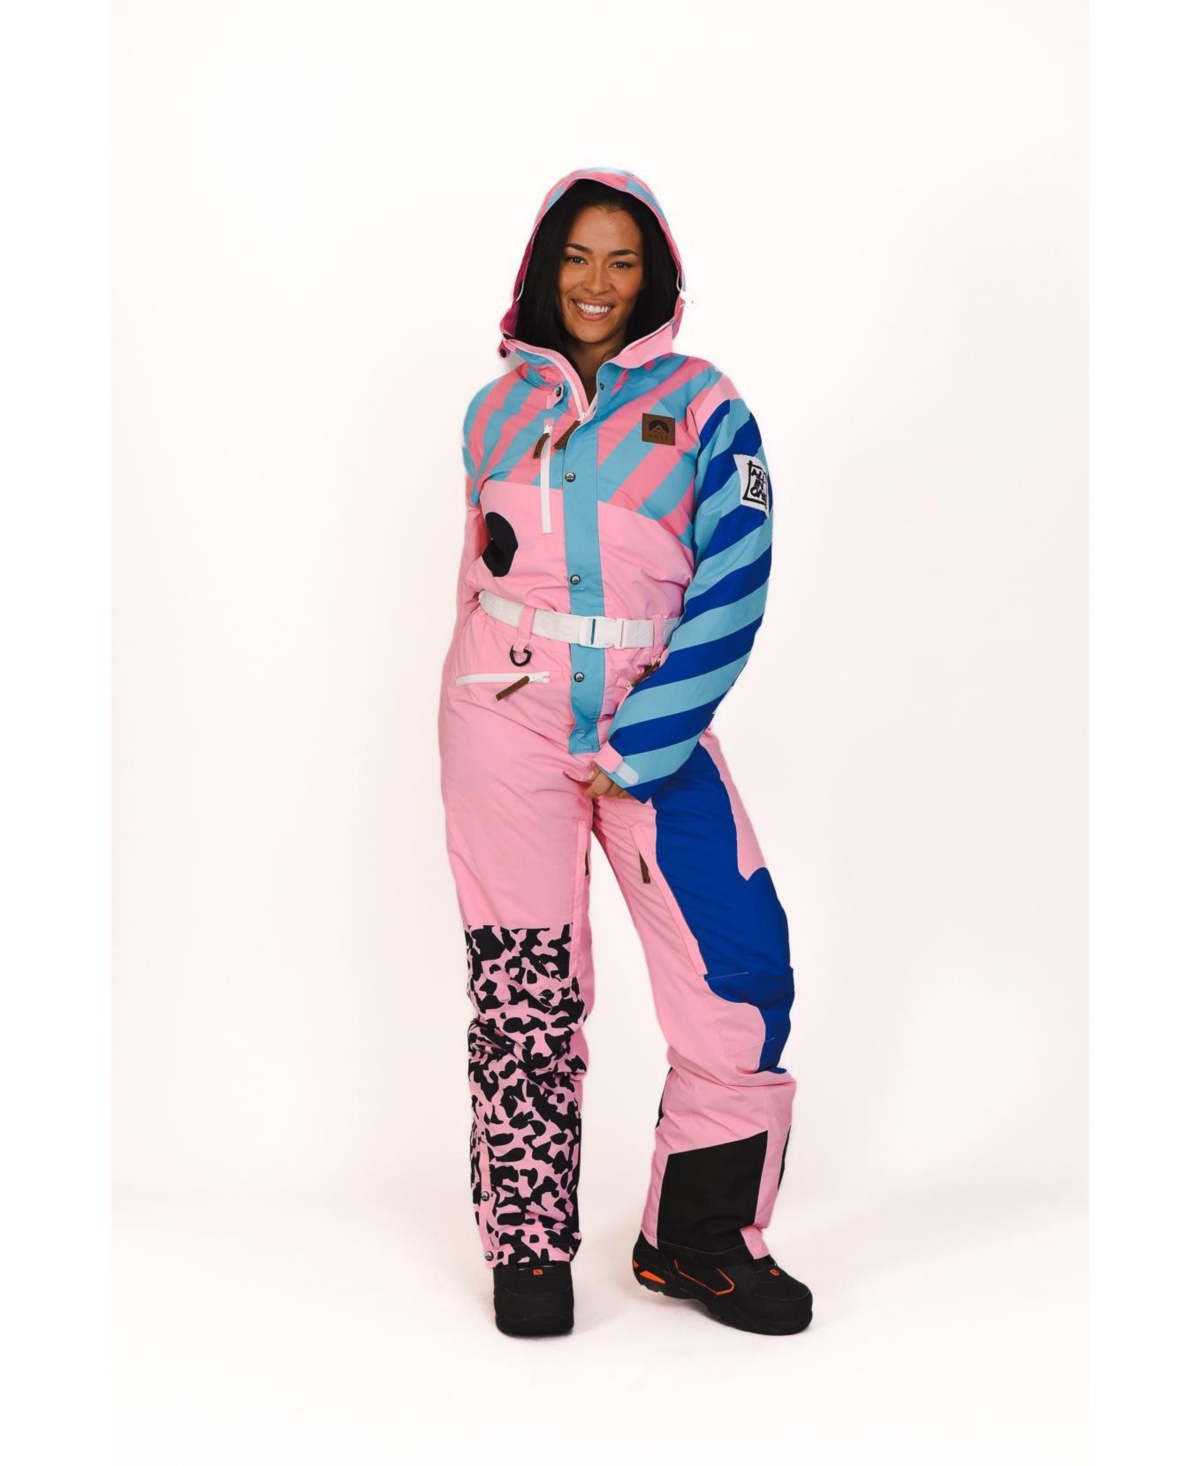 Penfold in Pink Ski Suit - Women's Curved - Pink